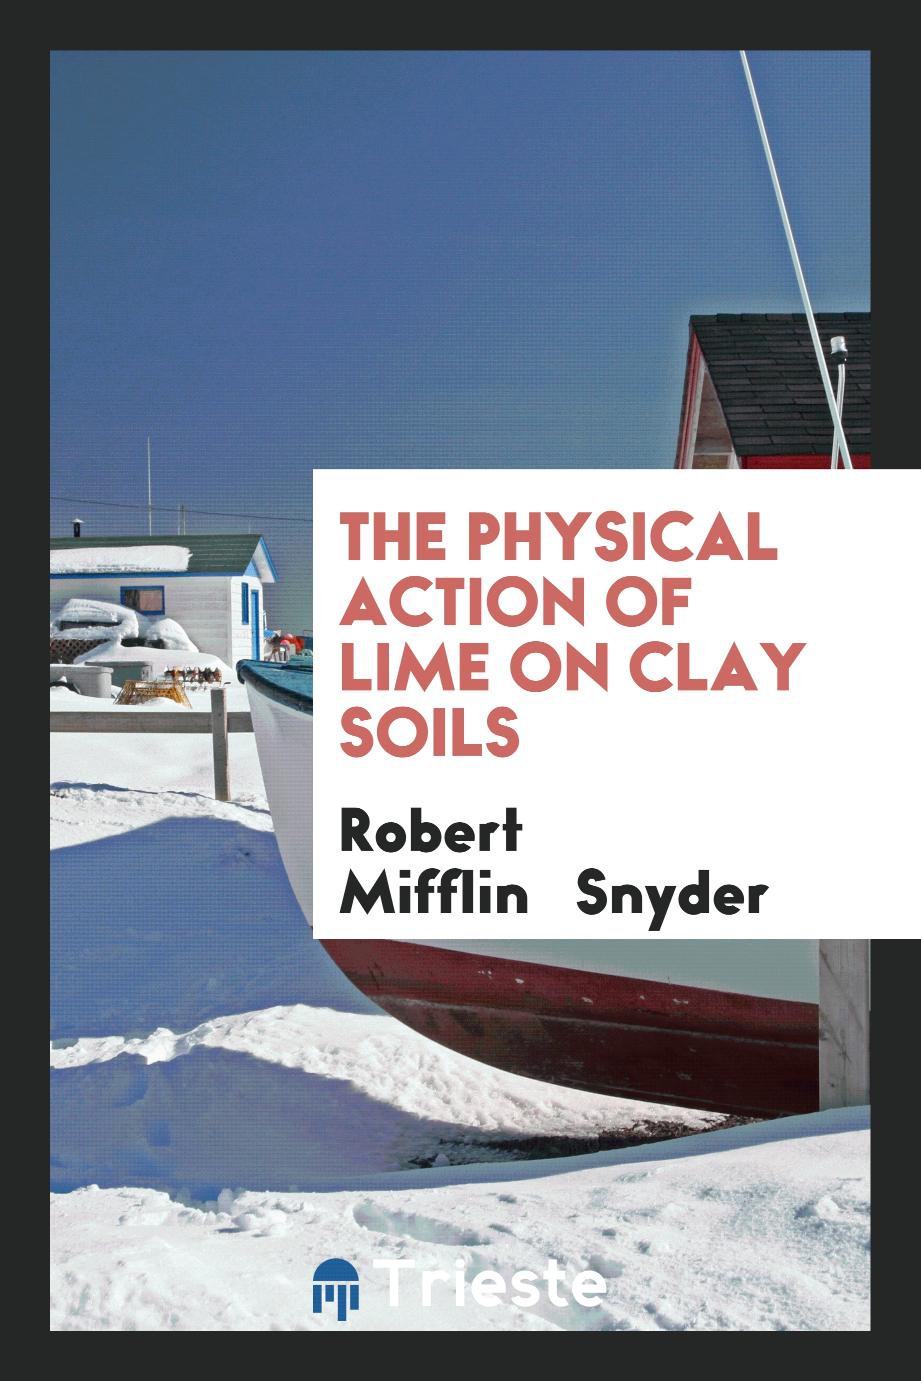 The physical action of lime on clay soils